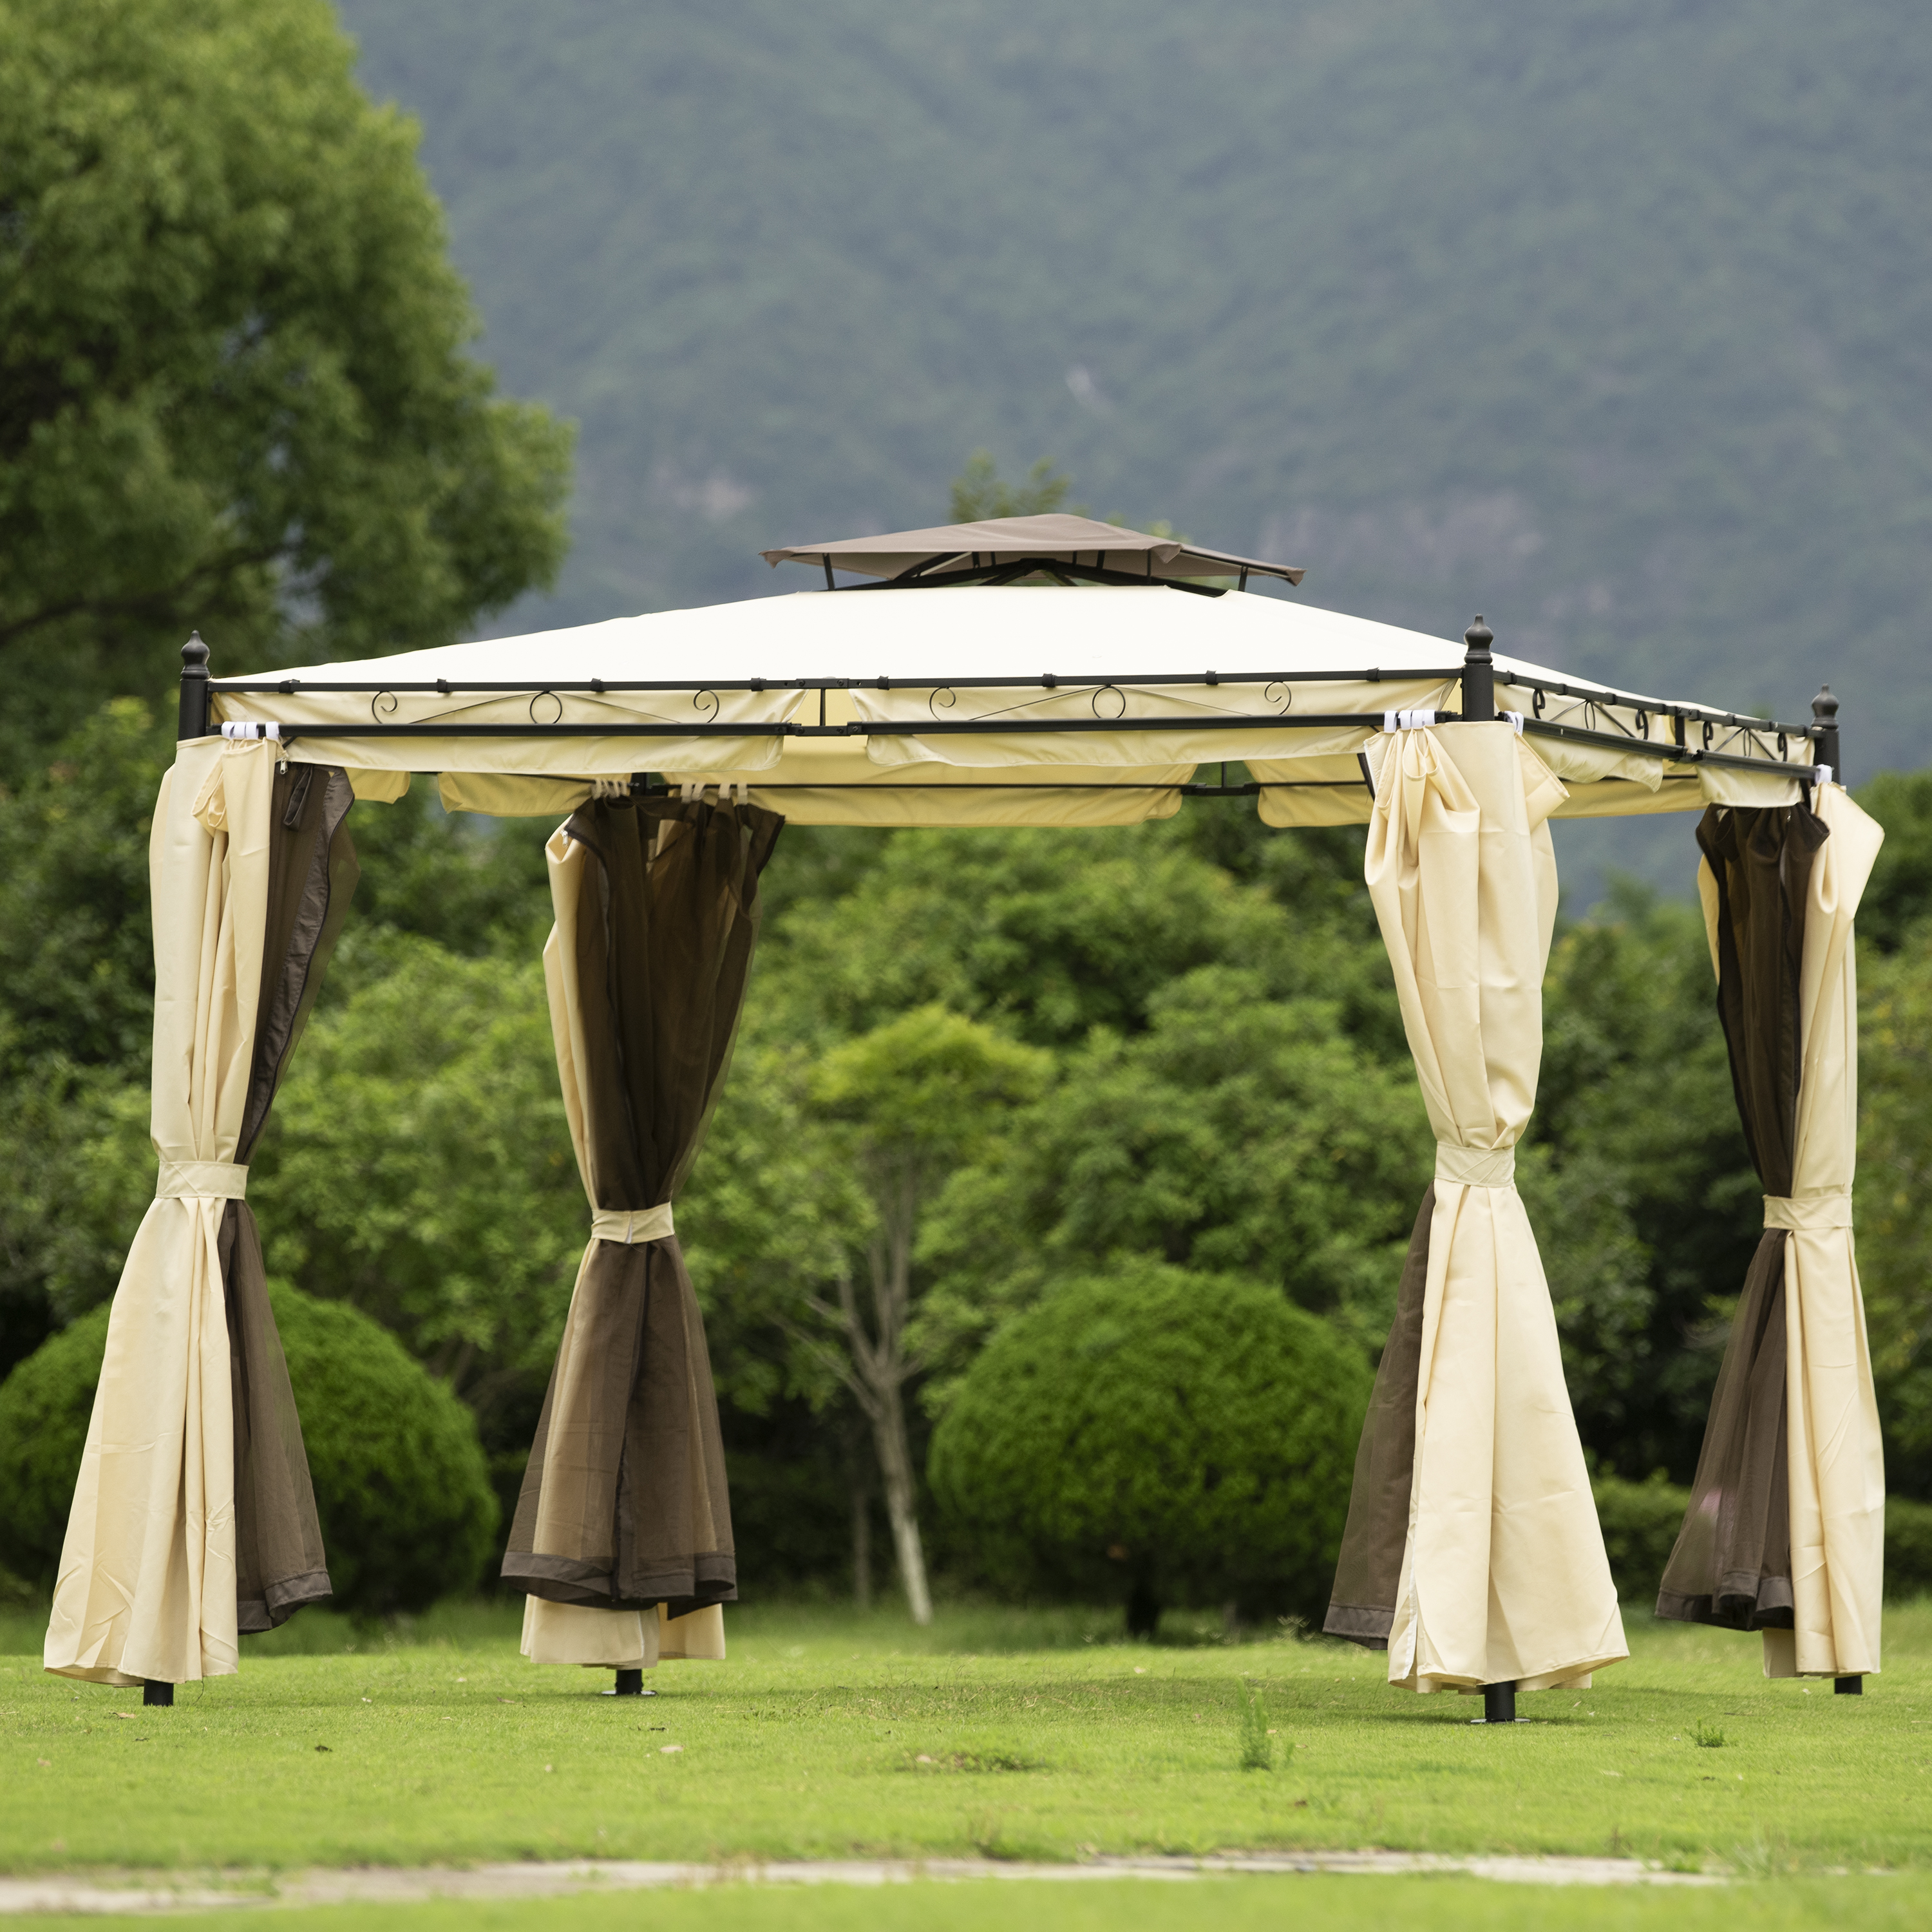  9.3ft.Lx9.3ft. W Outdoor Patio Gazebo with Mosquito nets and Polyester Curtains, Double Roofs for Decks, Poolsides, Gardens, Beige-CASAINC